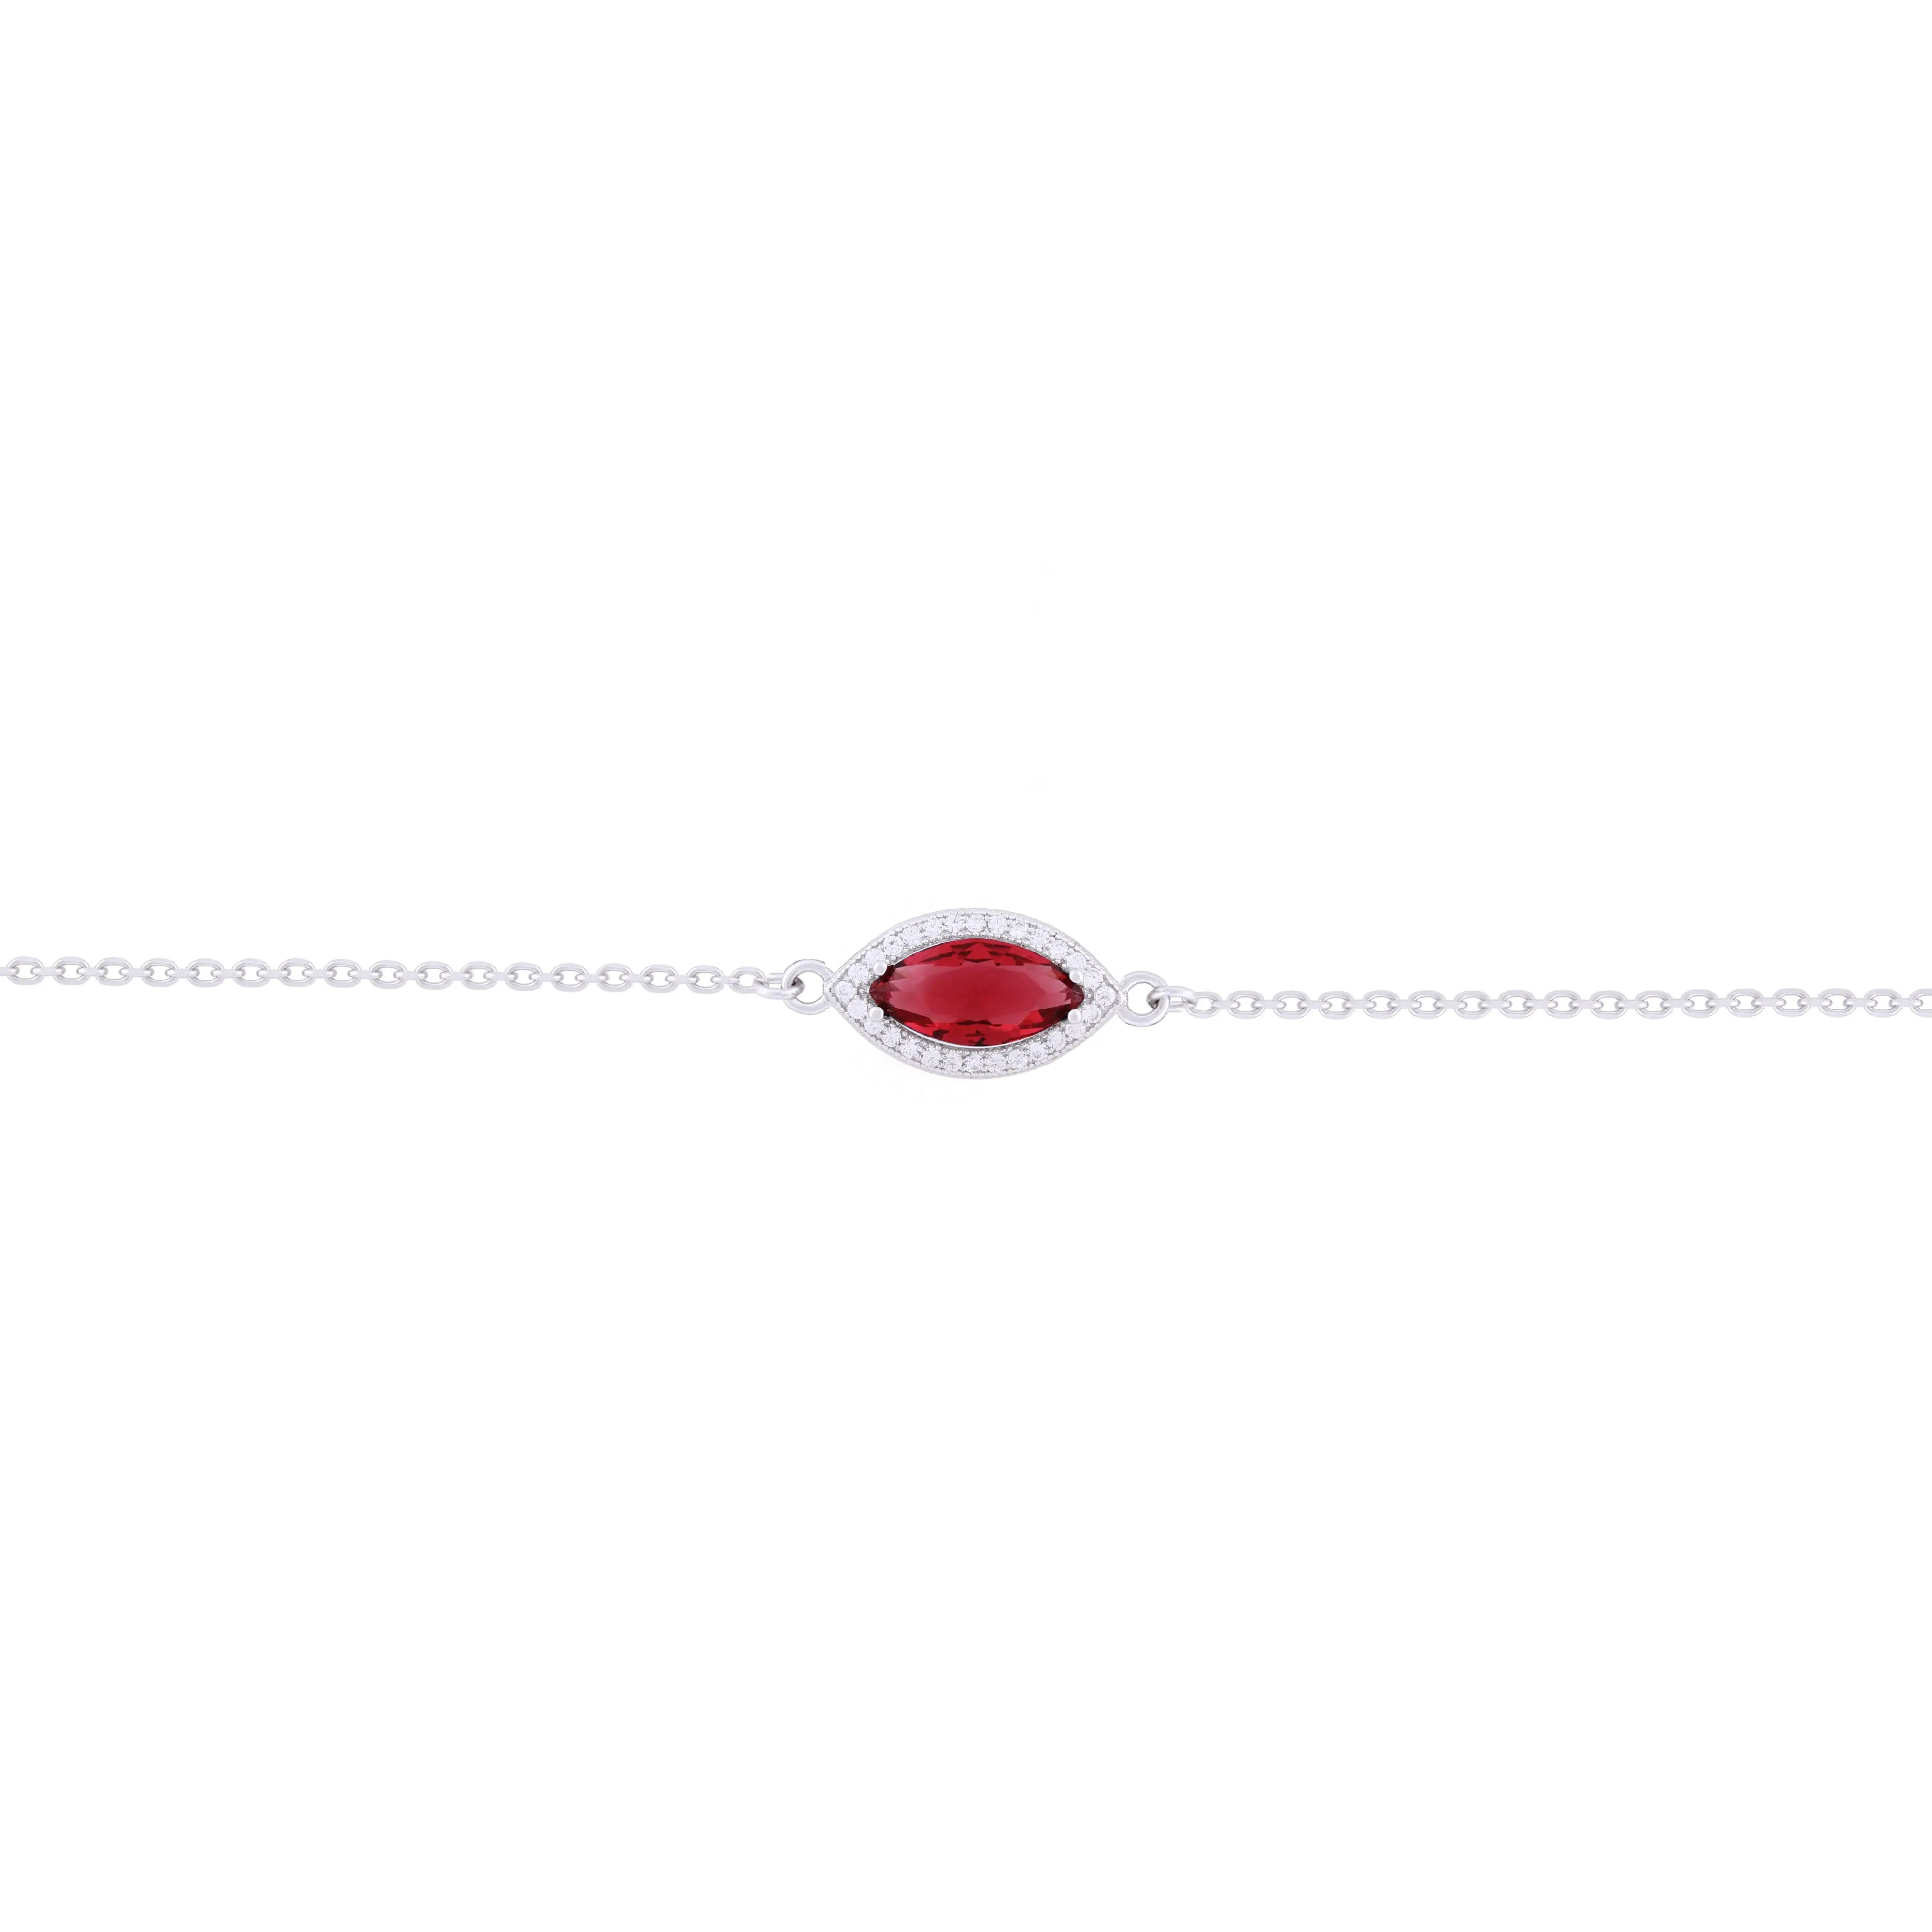 Asfour Chain Bracelet with Red Zircon Stone In 925 Sterling Silver